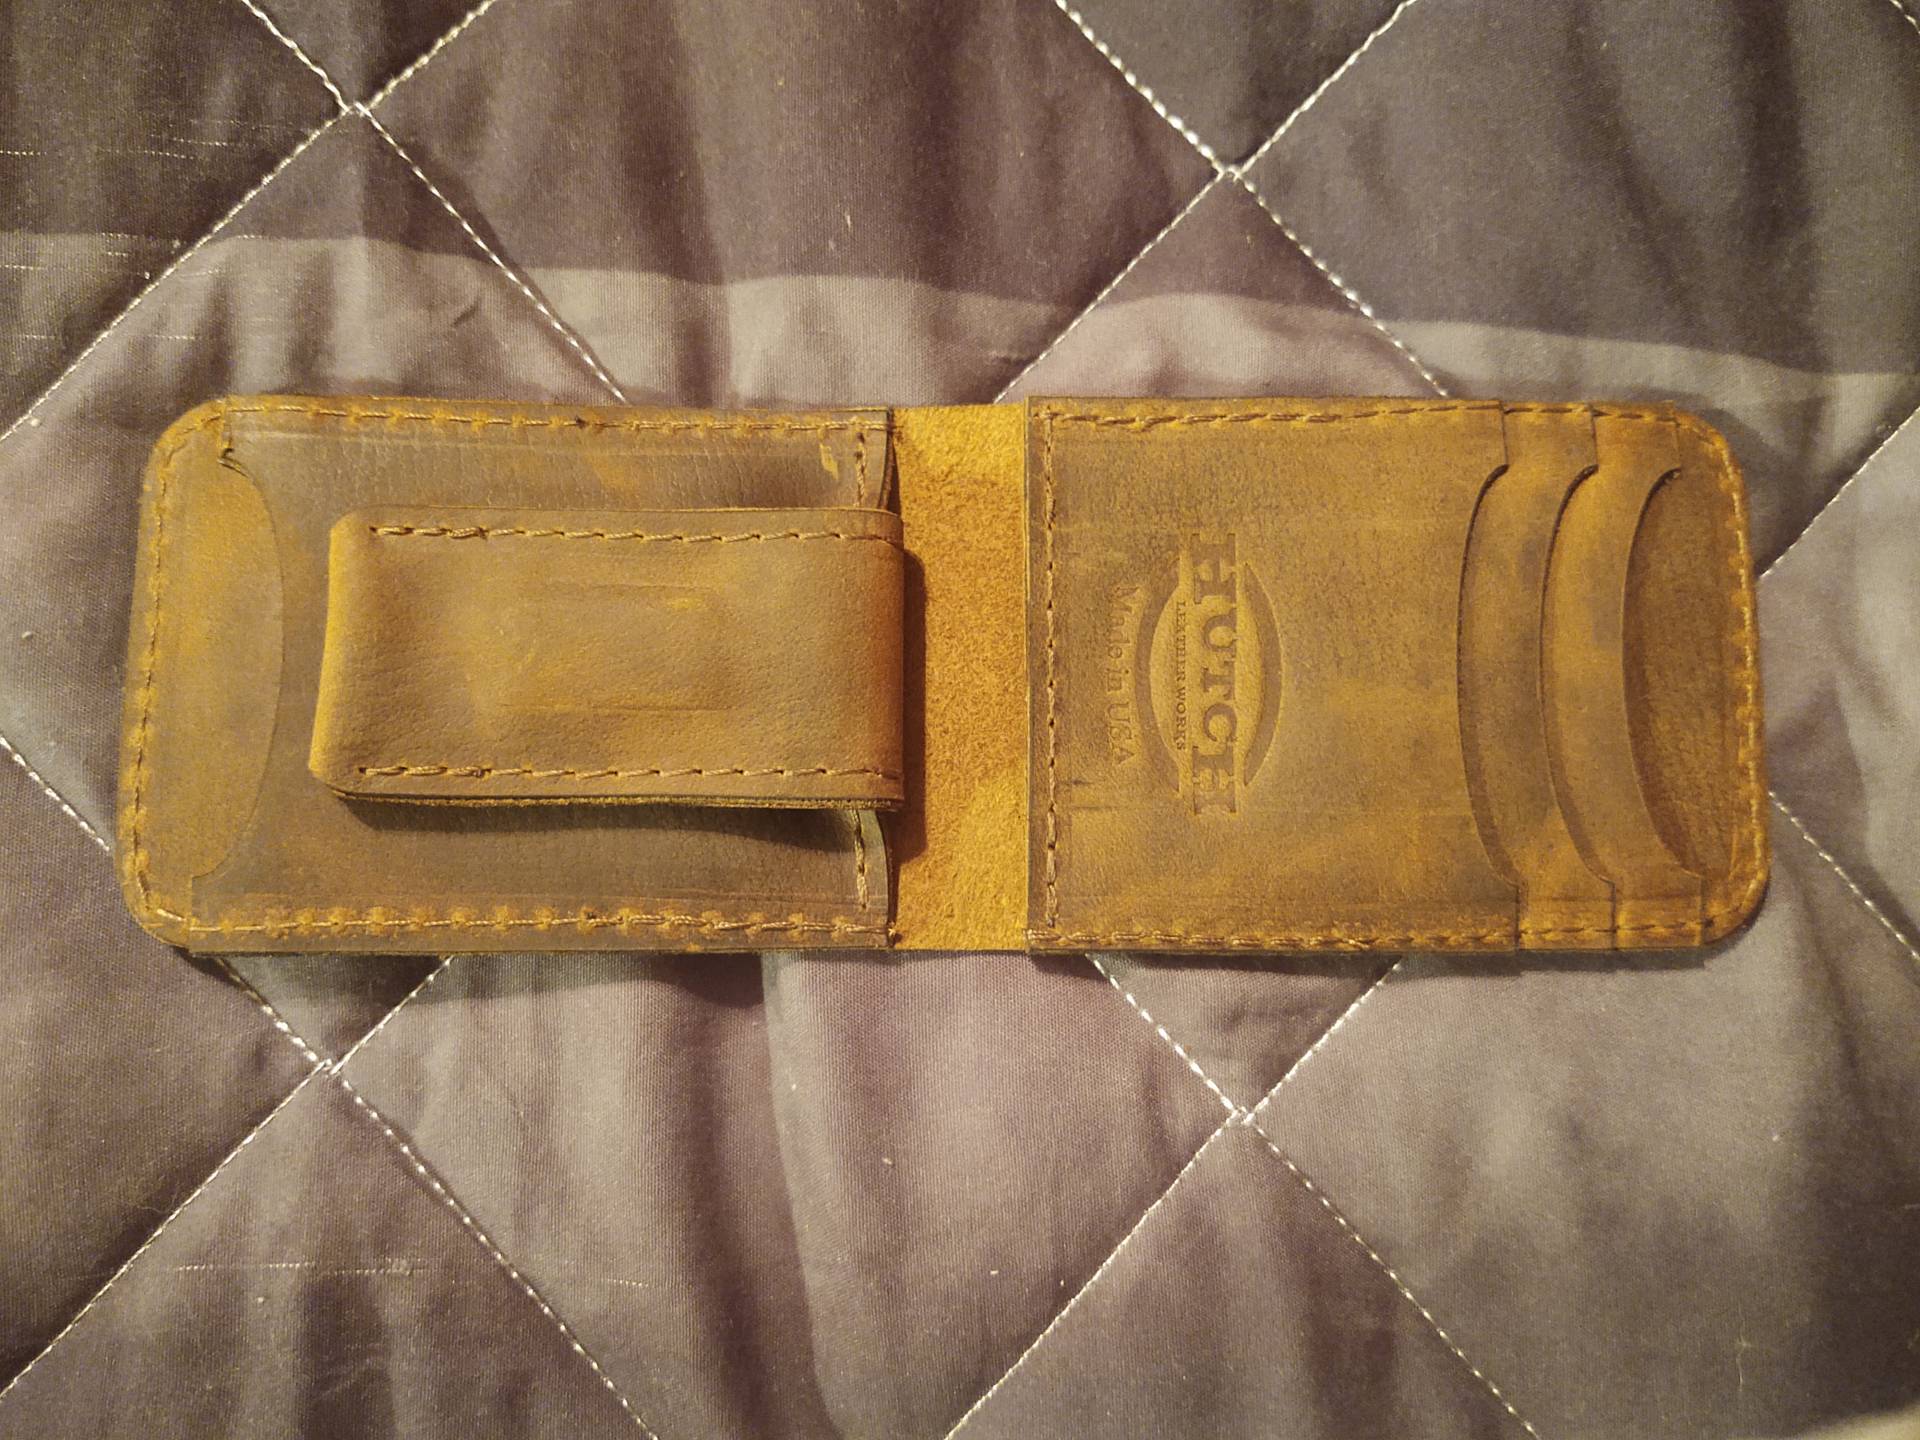 Borgen Front Pocket Wallet featuring buffalo leather